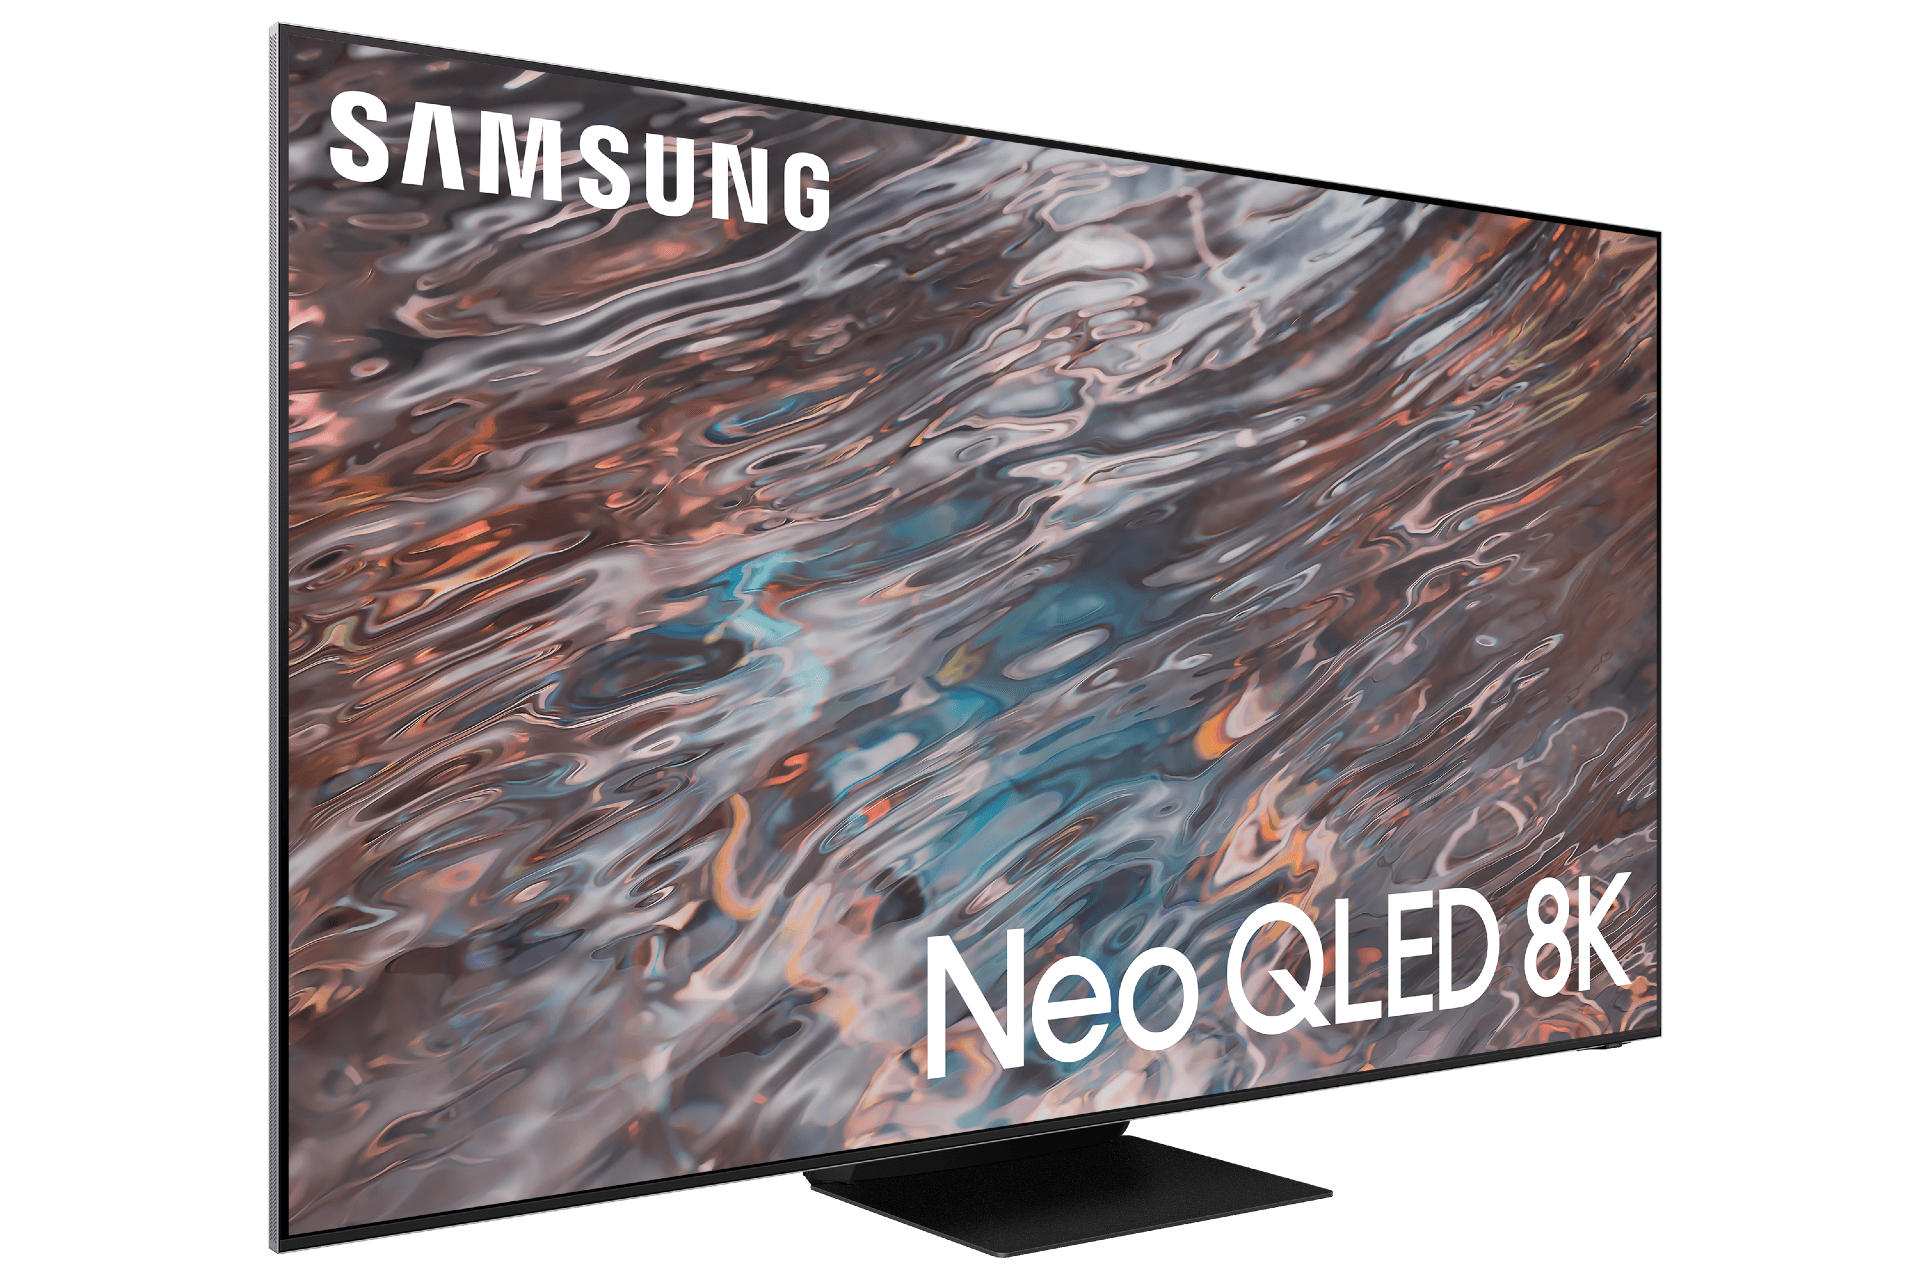 Samsung 2021 Neo QLED TVs: Key features, price in the Philippines